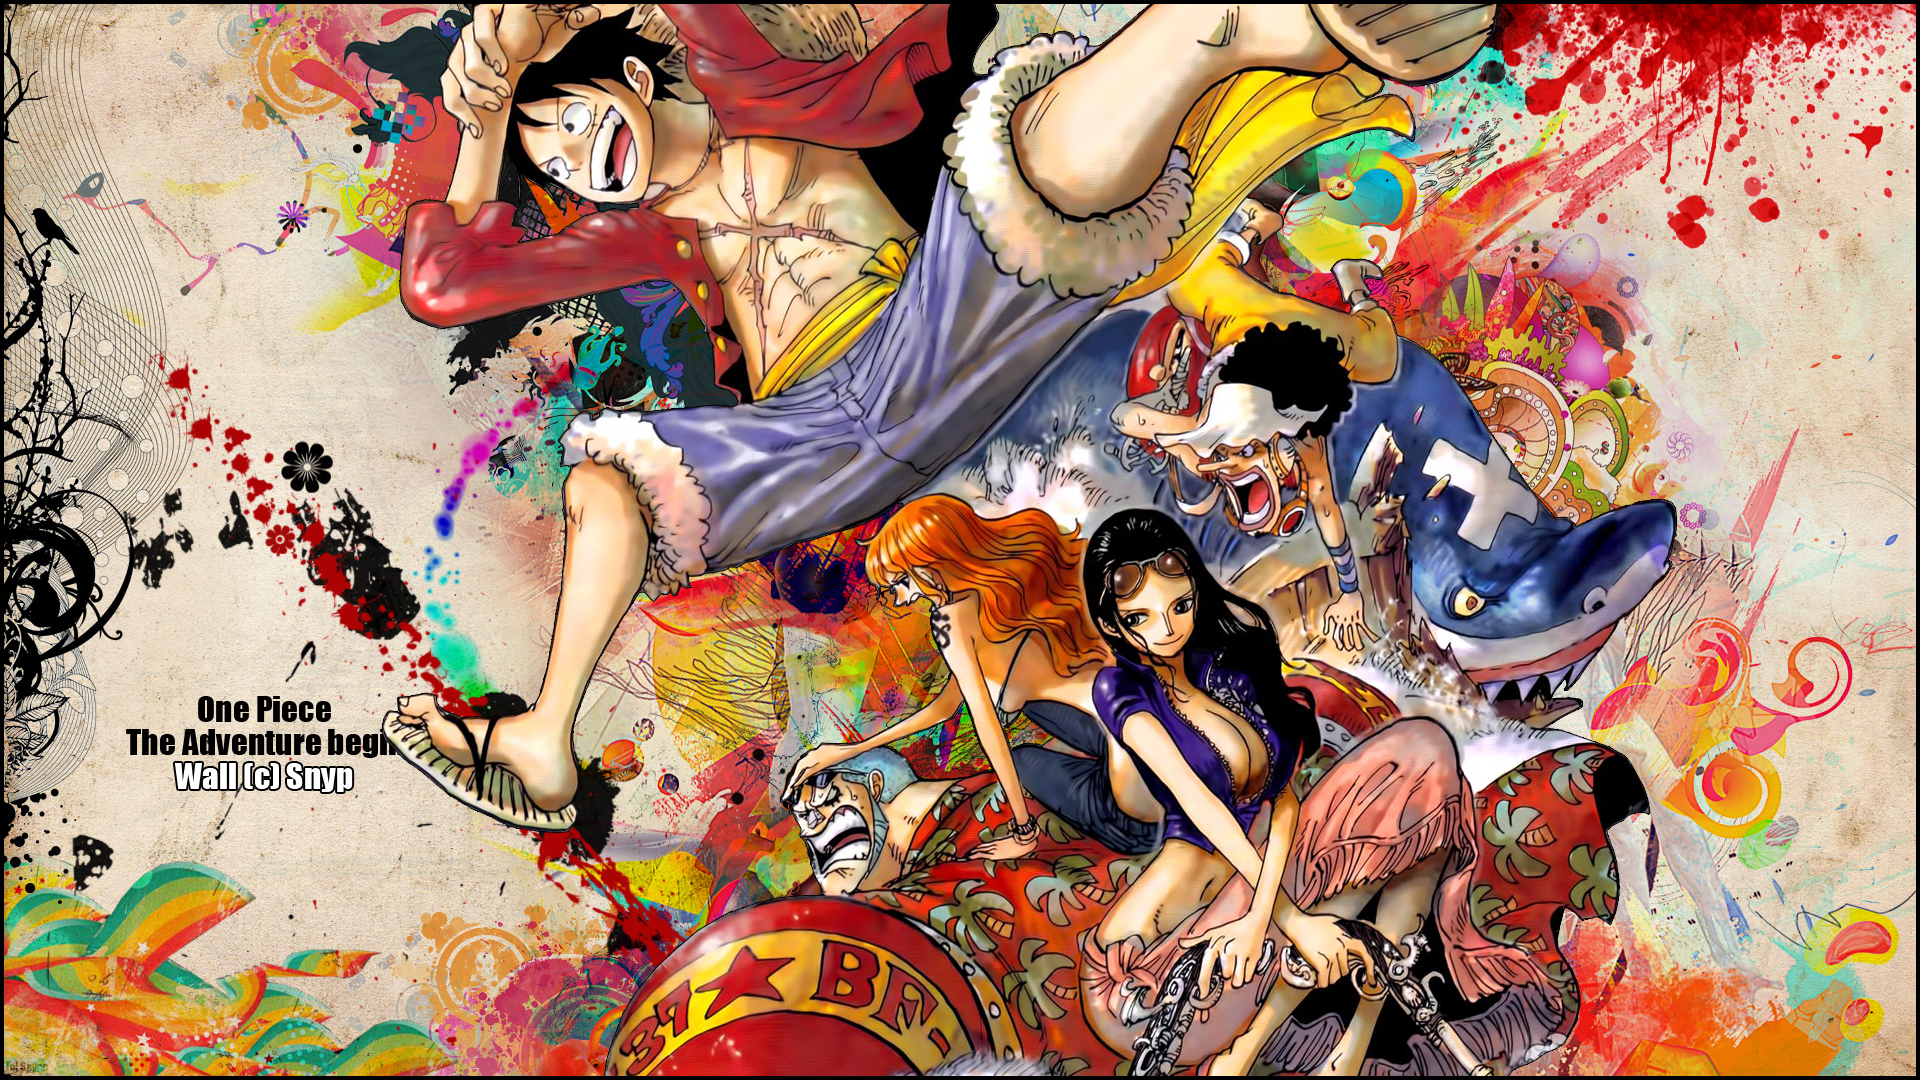 HD Cool One Piece Wallpaper Full Size - HiReWallpapers 3625